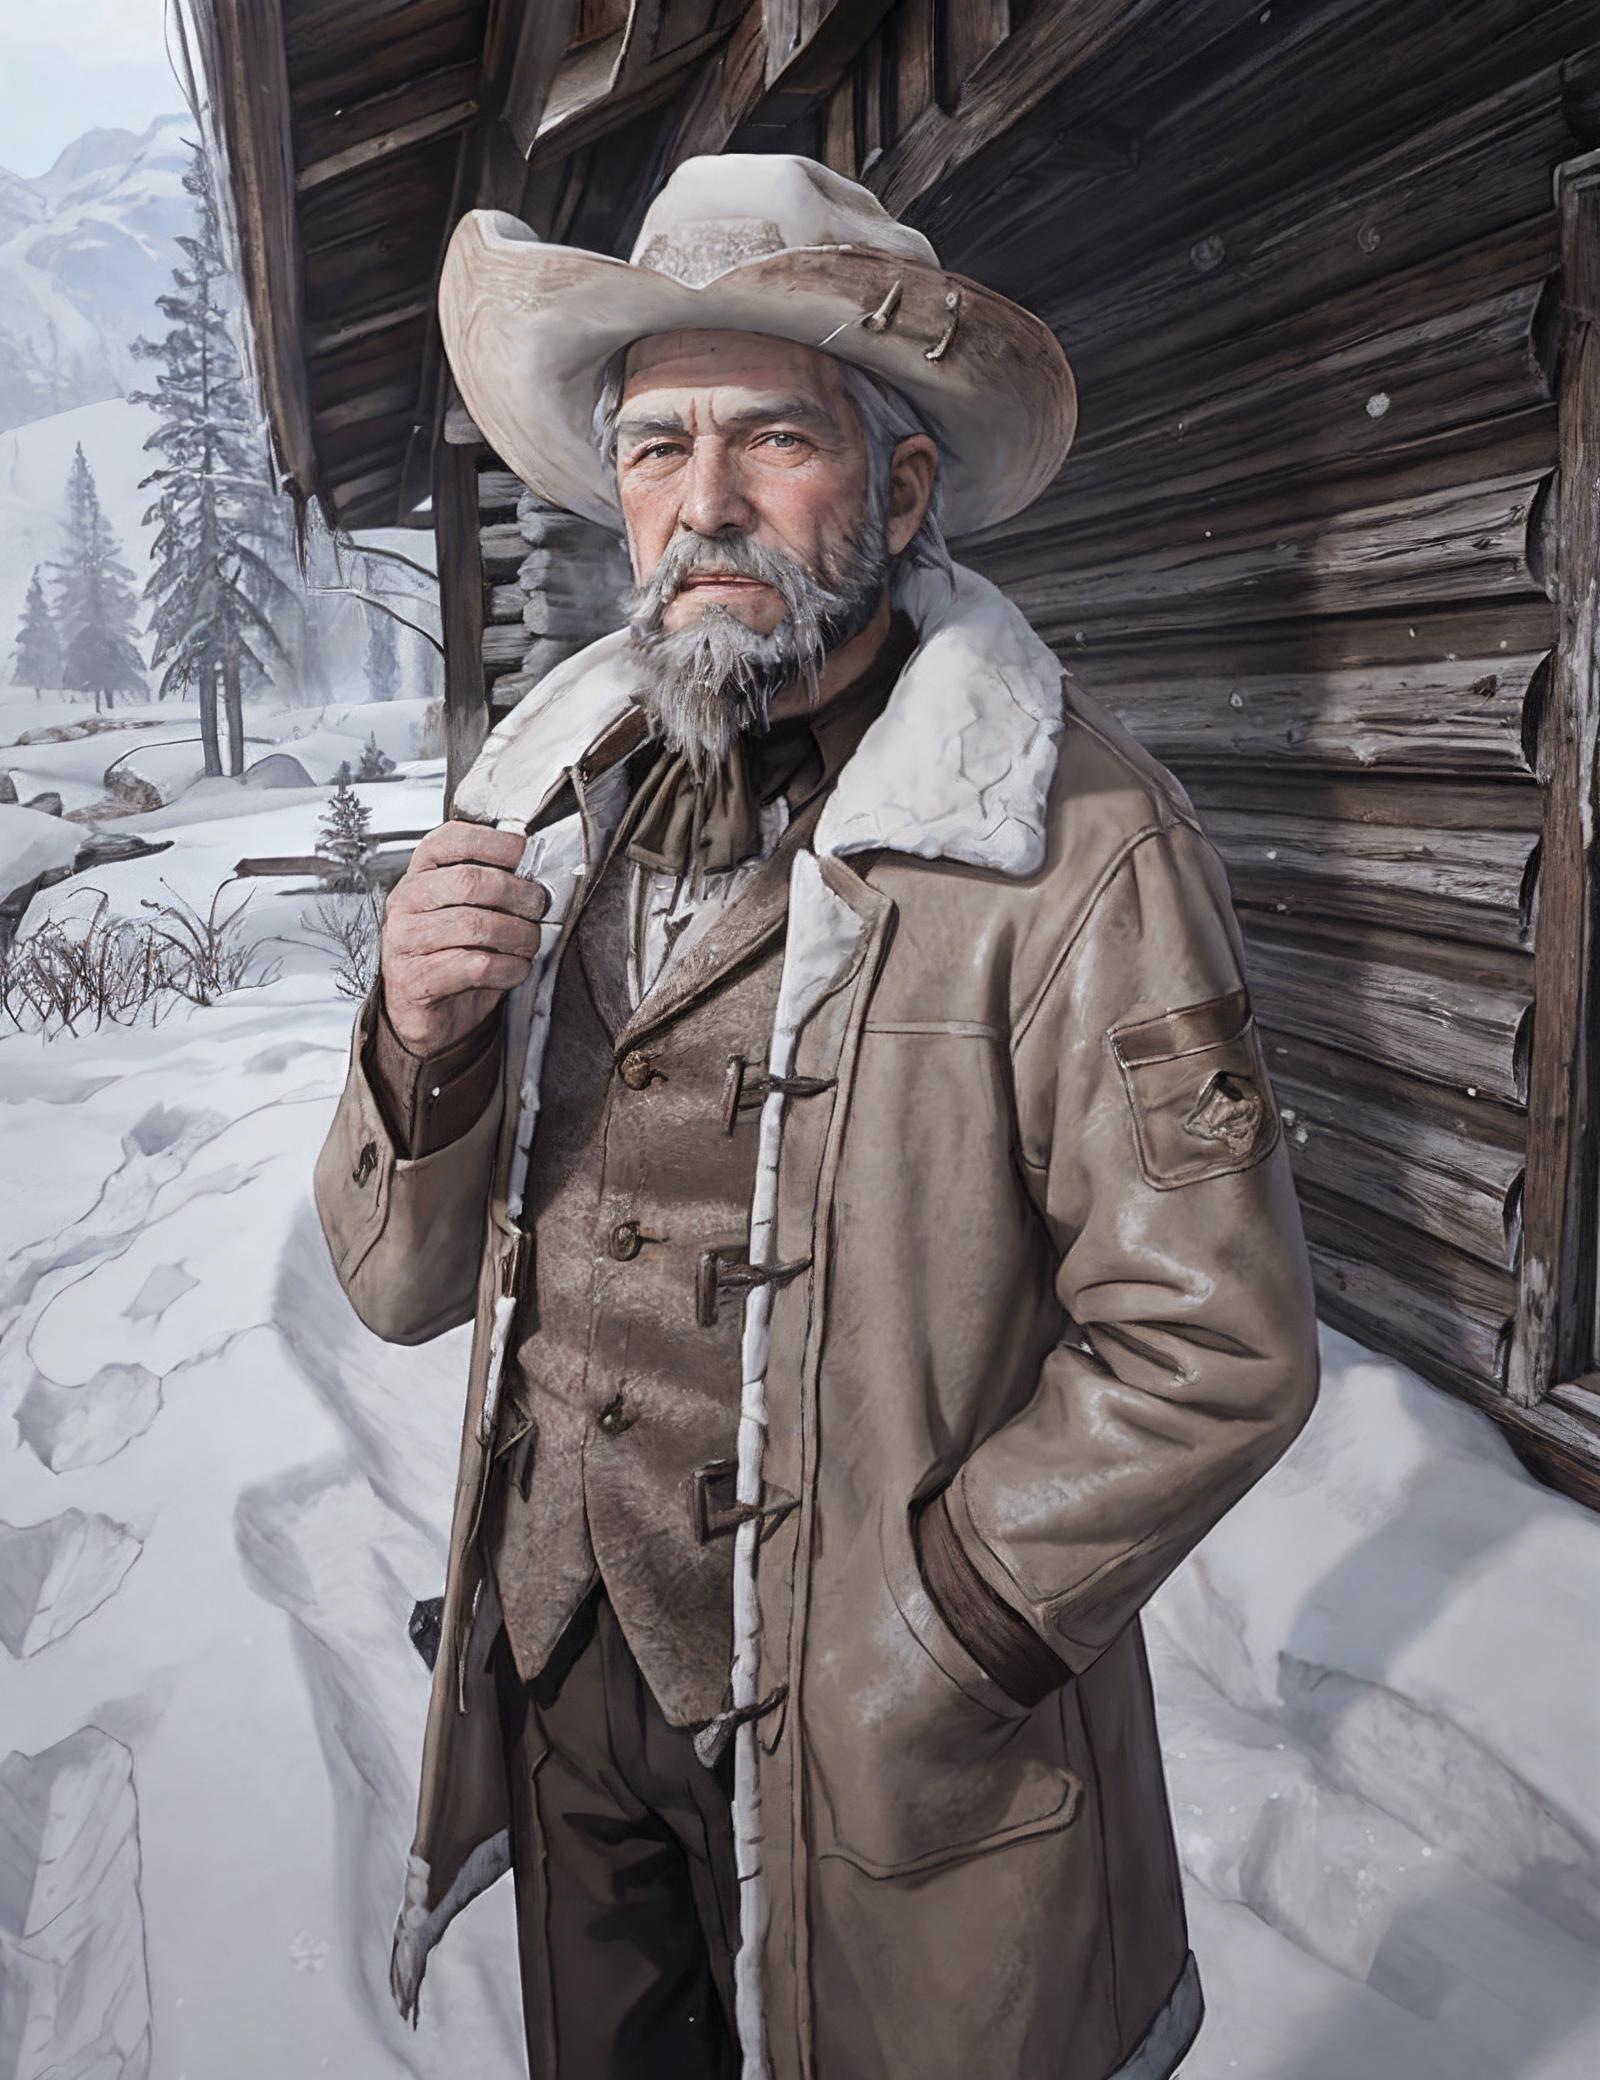 Red Dead: Colter image by Cavendish